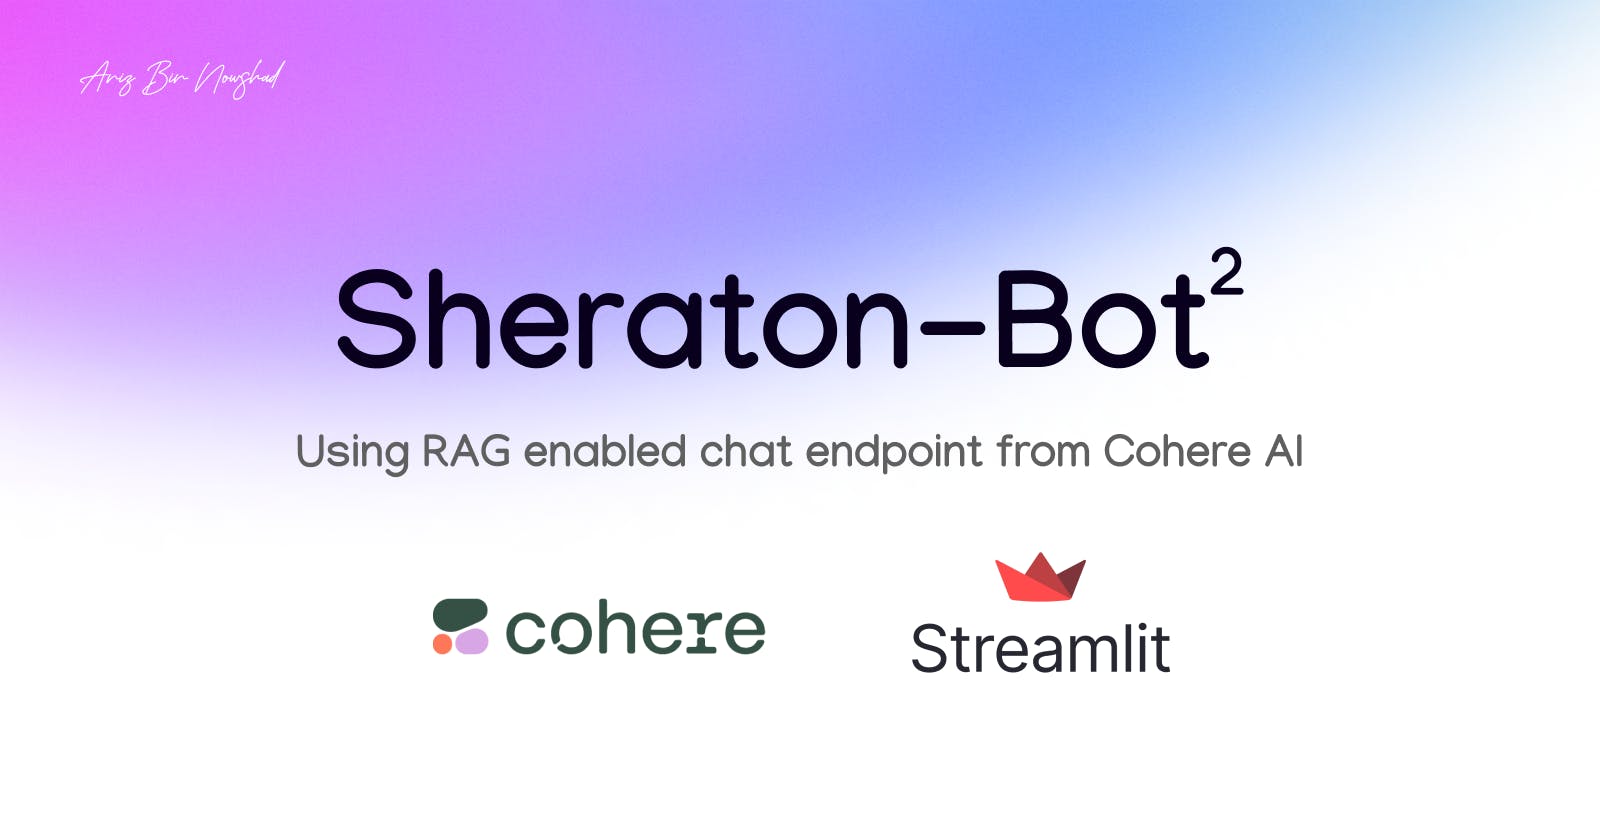 Chatbot developed using RAG enabled chat endpoint from Cohere AI